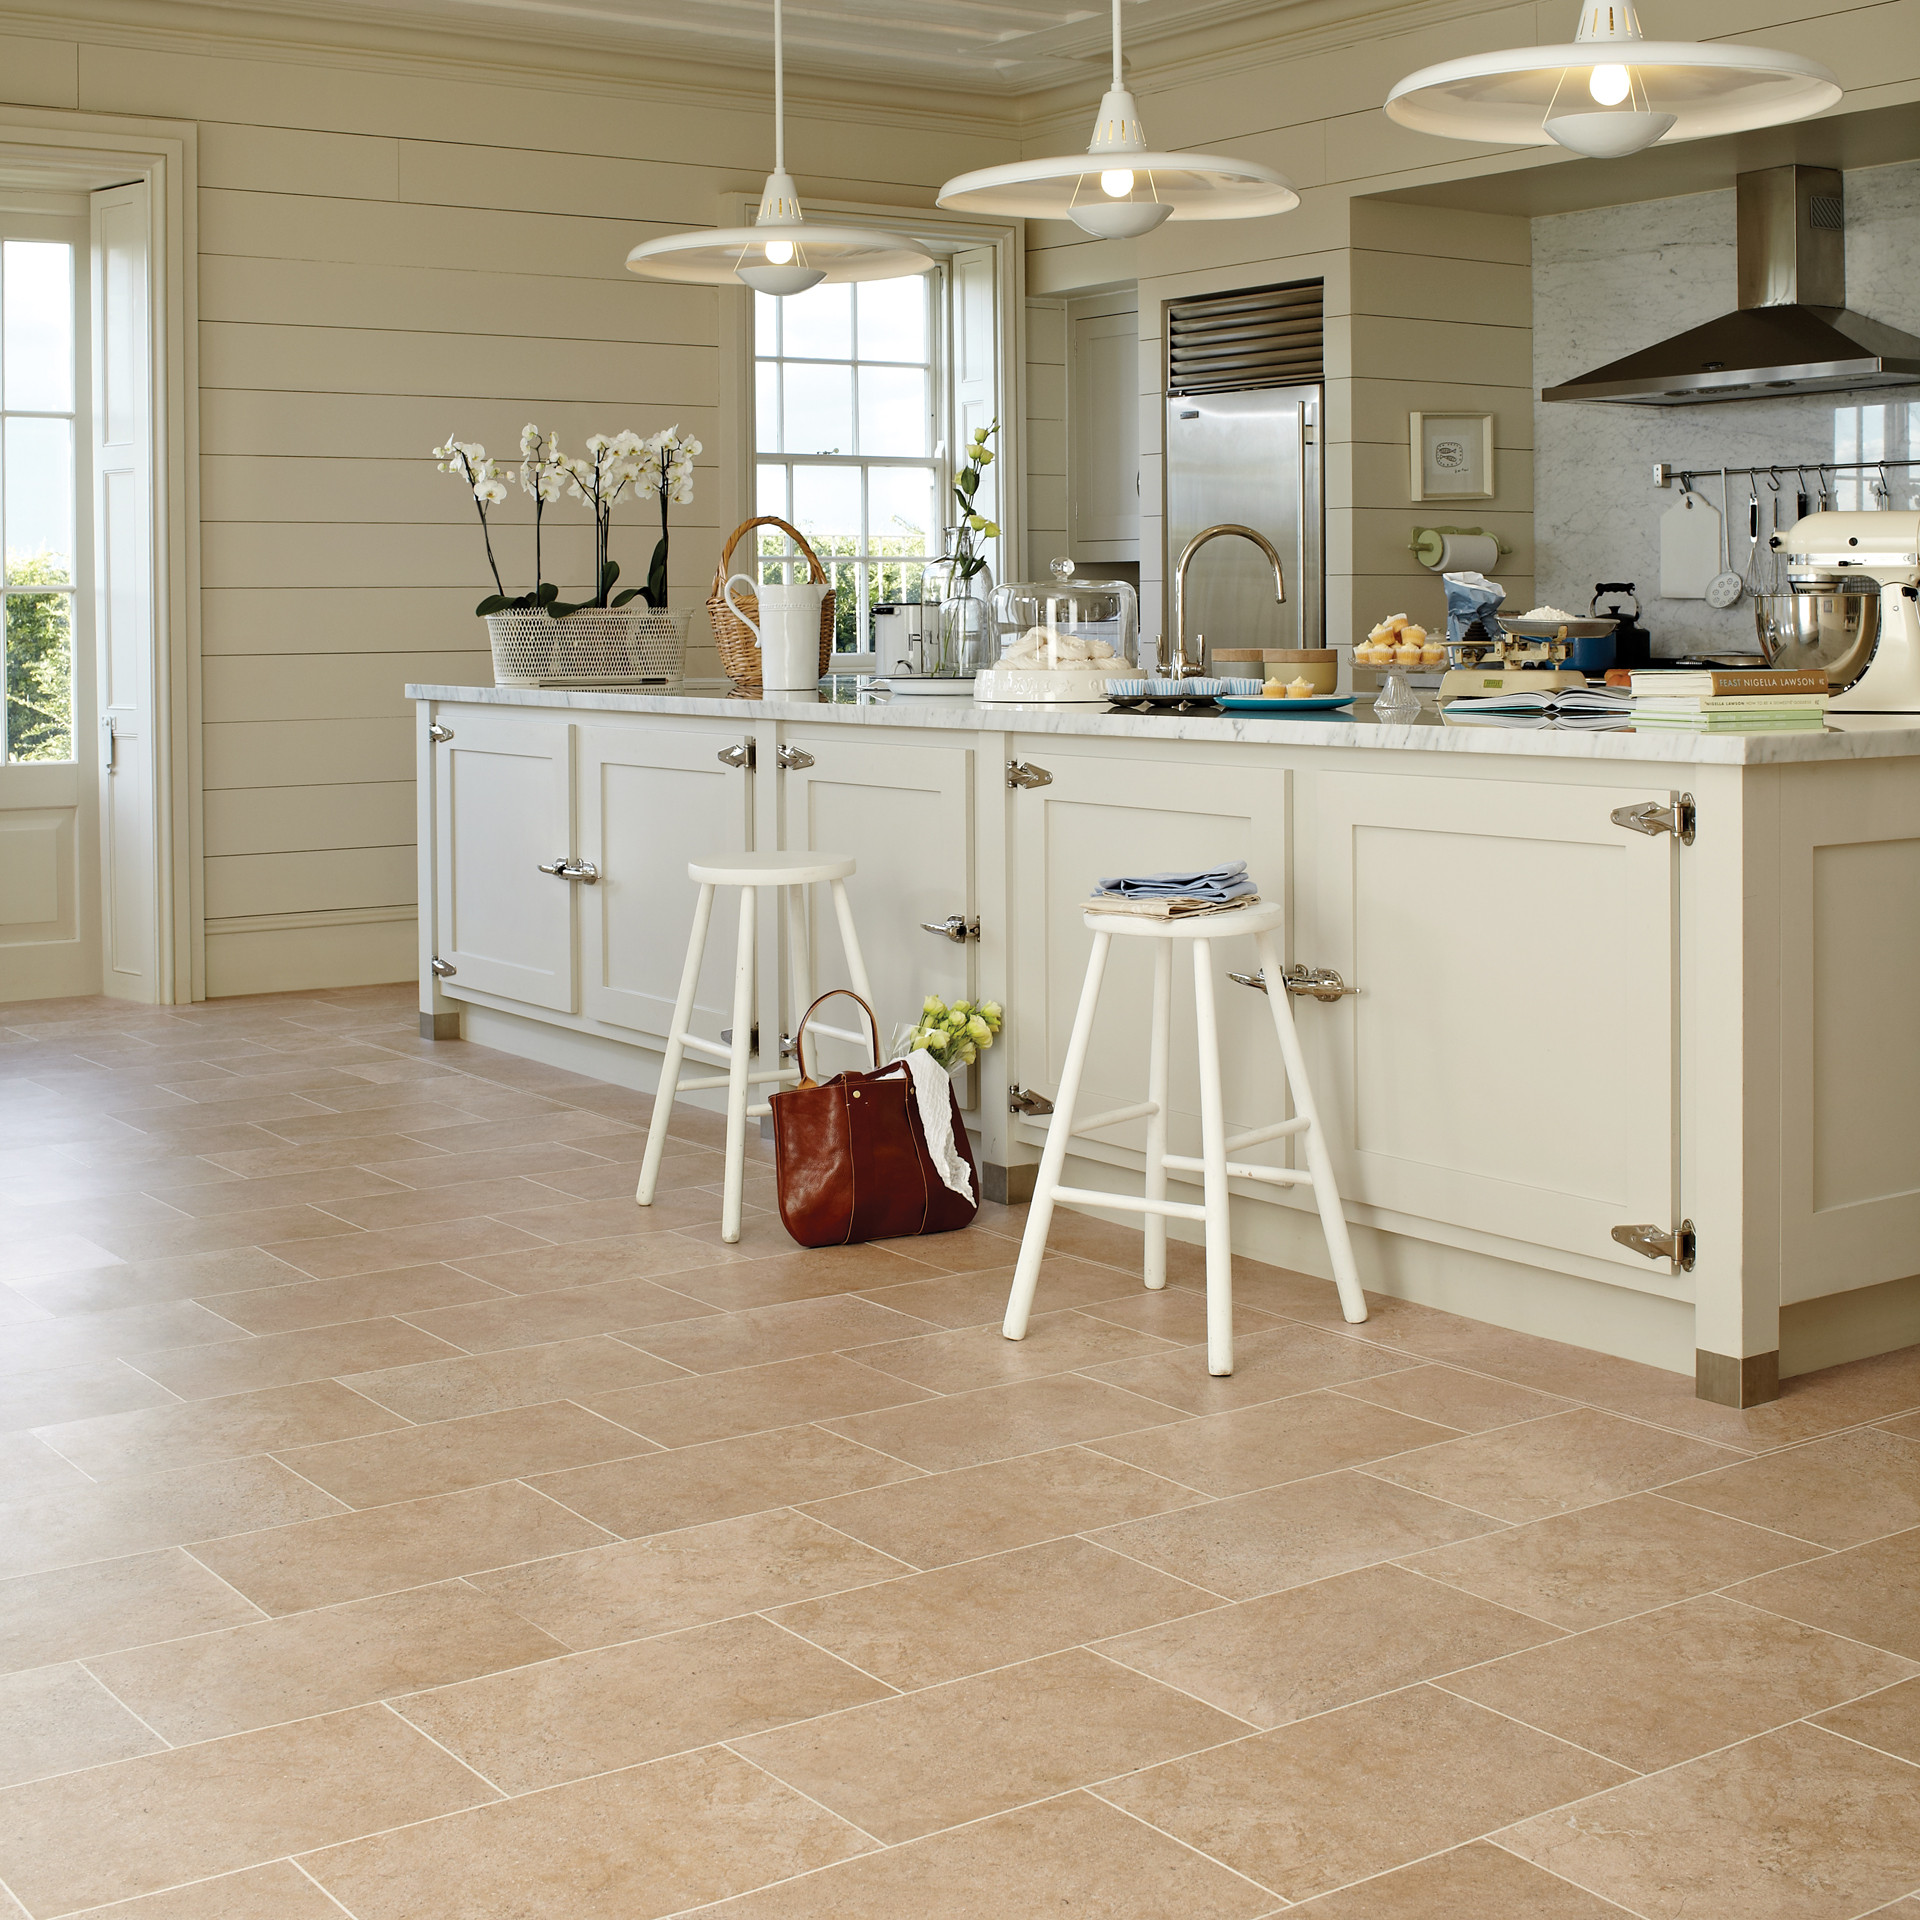 Stone Kitchen Flooring
 Classic Modern Design Ideas and Tips